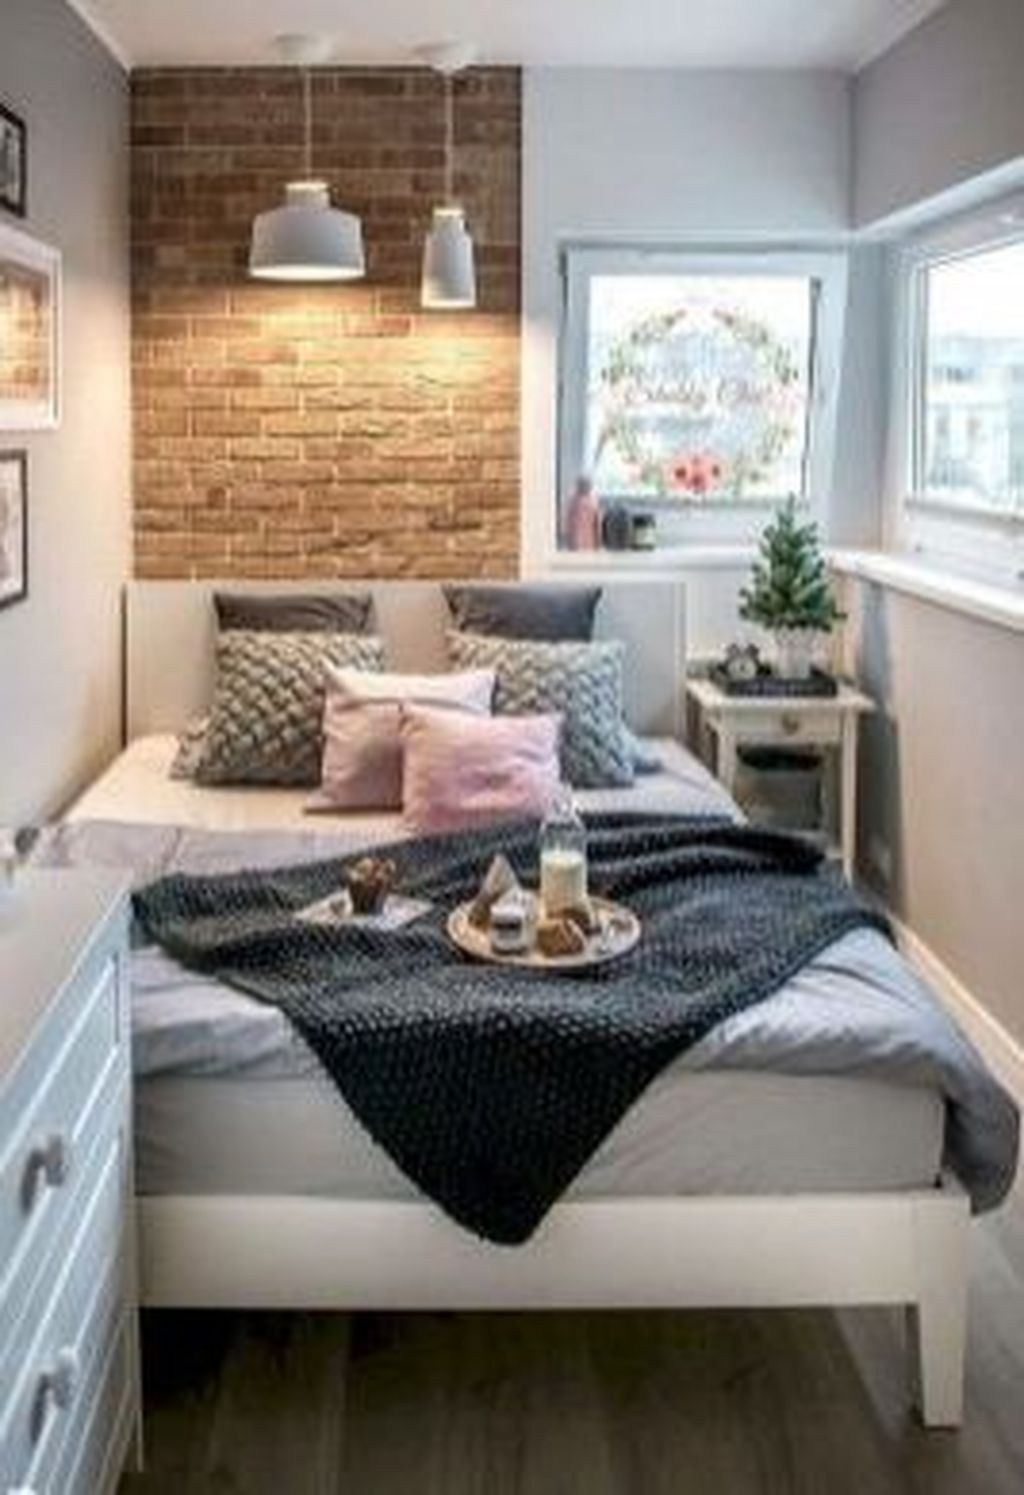 Stunning Teens Bedrooms Design Ideas For Small Spaces To Try 15